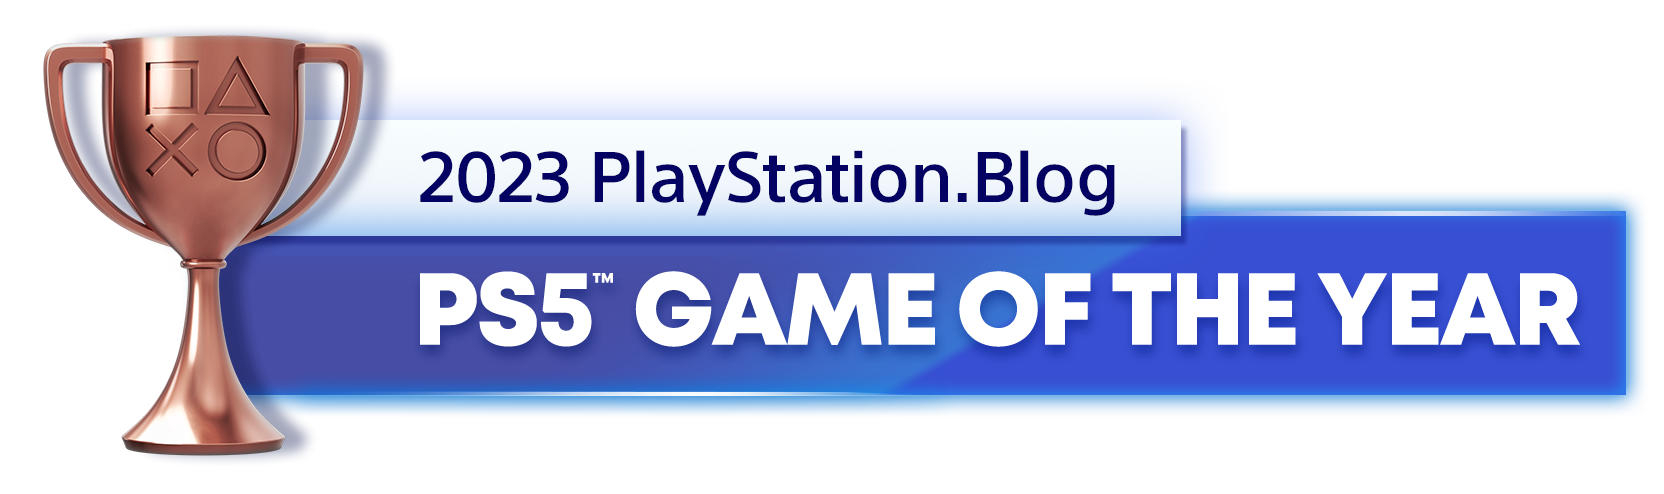  Bronze Trophy for the 2023 PlayStation Blog PS5 Game of the Year Winner